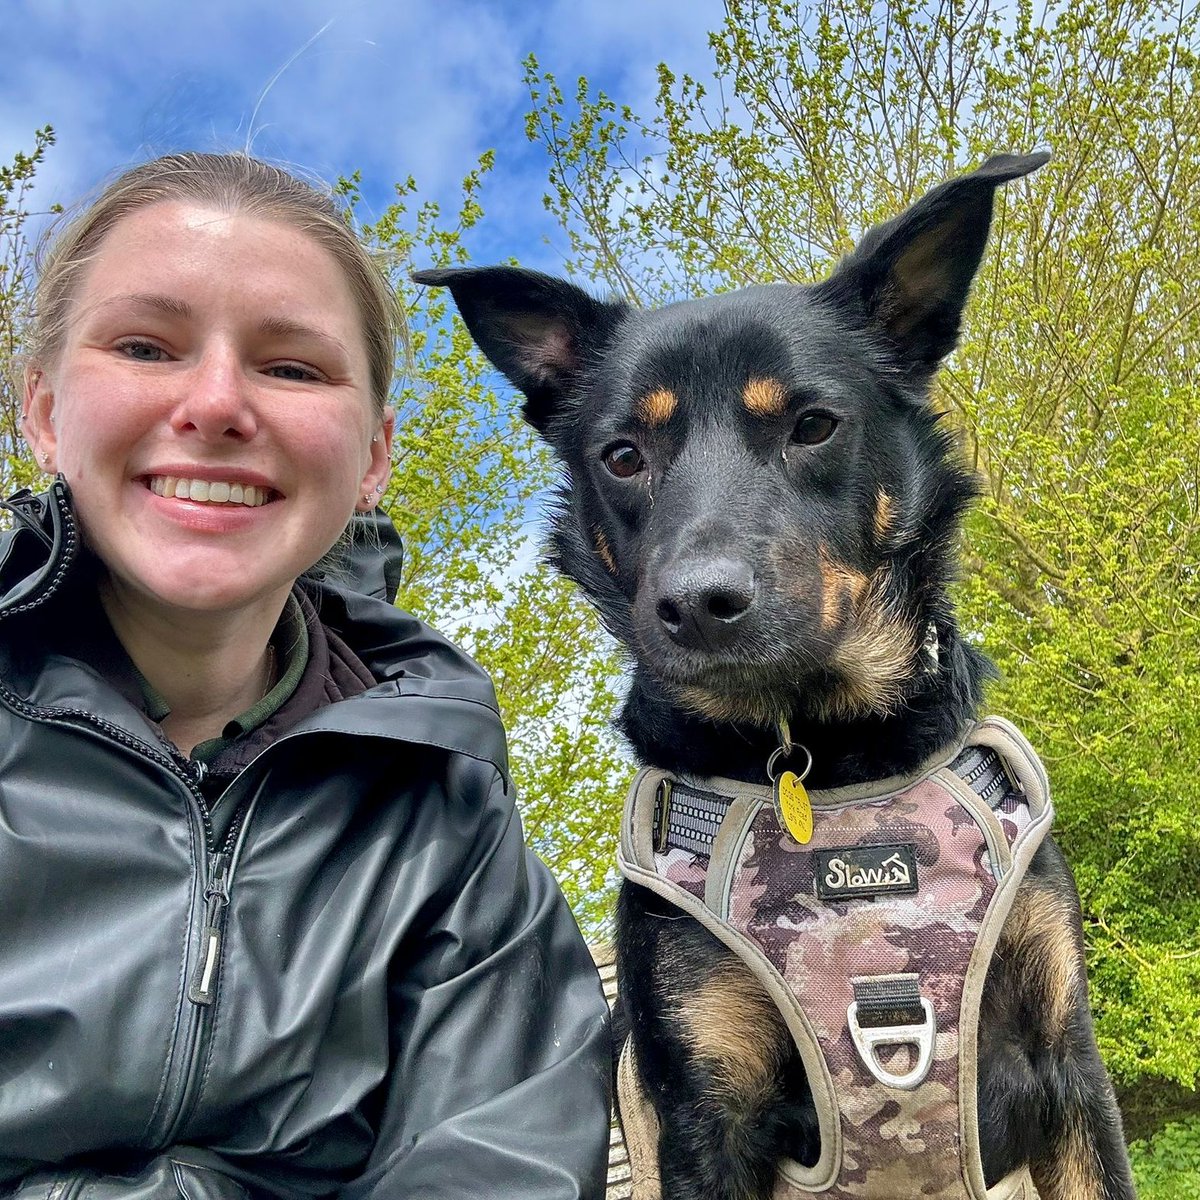 A cracking #SundaySelfie from Max who's been out for a lovely off-site walk with his friend Sophie. 😍 Meet Max👉 bit.ly/3uZkSzB #SelfieSunday #SundayFunday #WeekendVibes #Walkies #RescueDog #AdoptDontShop #Rehome #Leeds #DogSelfie #Kelpie @DogsTrust